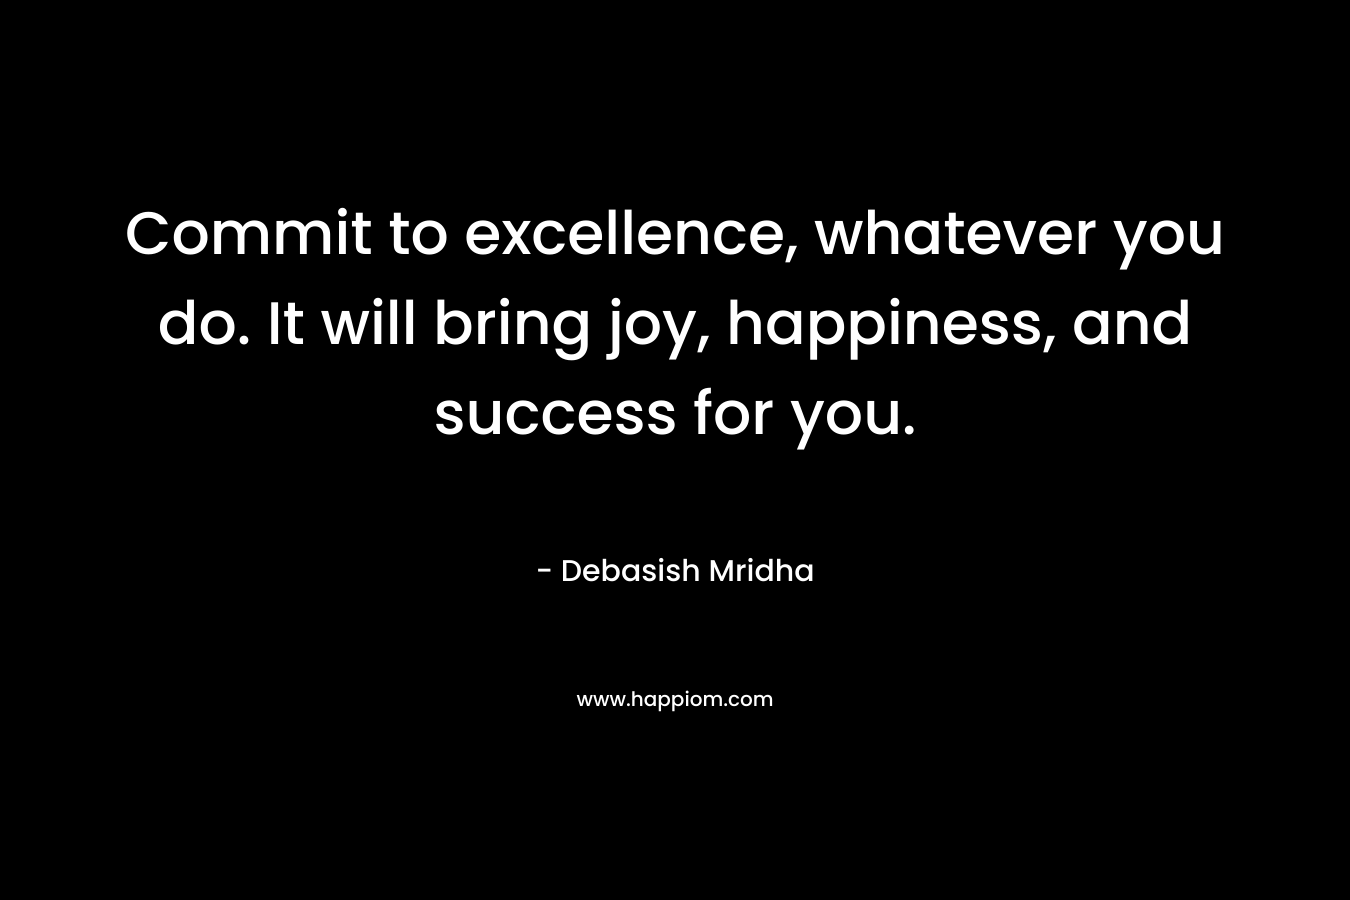 Commit to excellence, whatever you do. It will bring joy, happiness, and success for you.